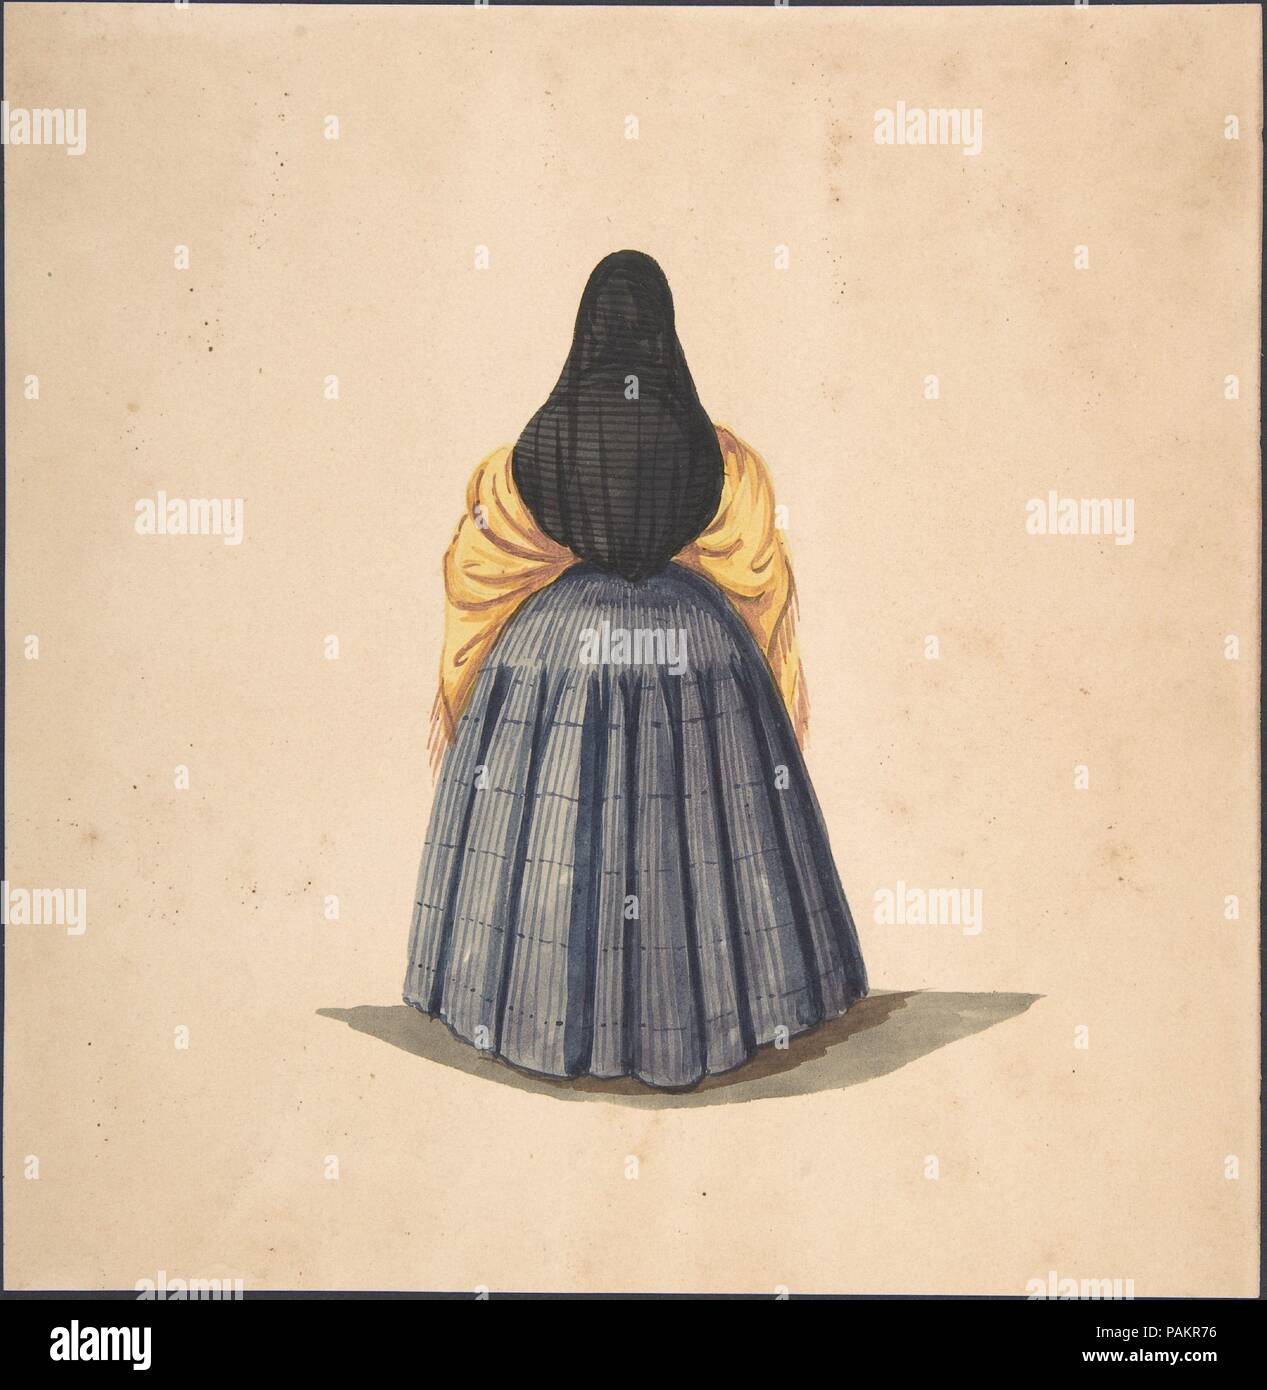 A Standing Woman, Seen from the Back. Artist: Anonymous, Peruvian, 19th century. Dimensions: sheet: 9 1/8 x 9 1/4 in. (23.2 x 23.5 cm). Date: 1840-50. Museum: Metropolitan Museum of Art, New York, USA. Stock Photo